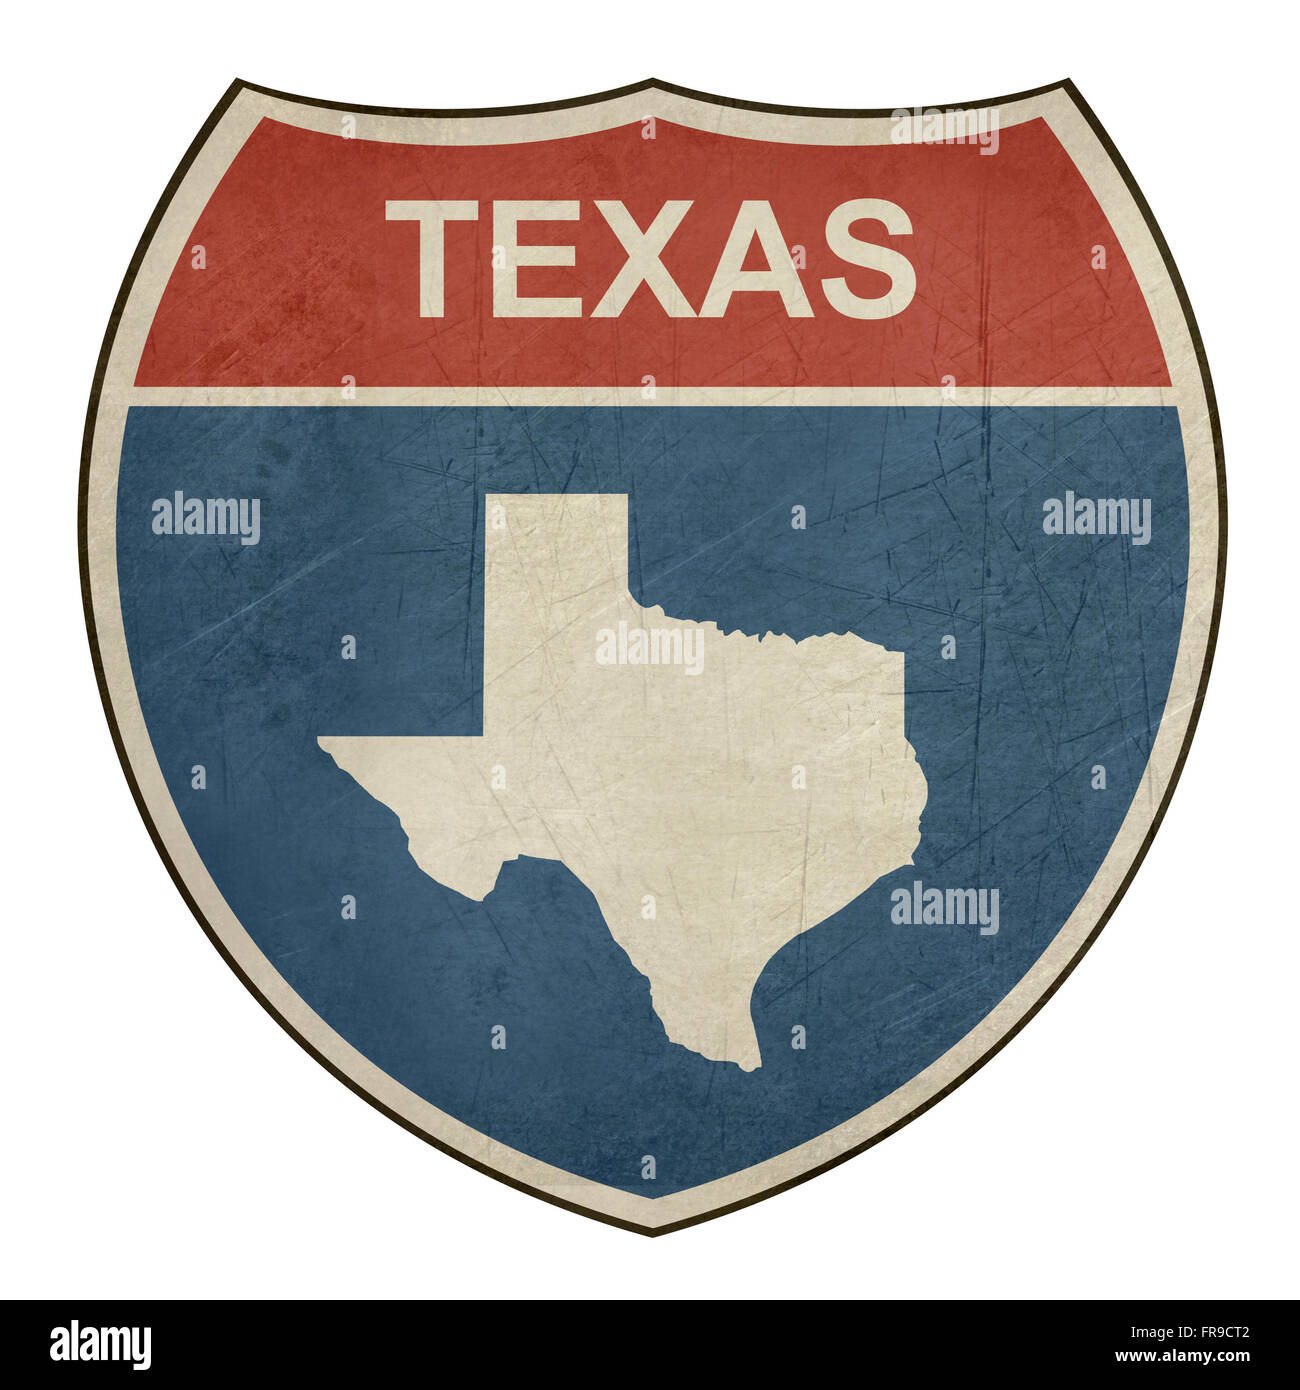 Grunge Texas American interstate highway road shield isolated on a white background. Stock Photo